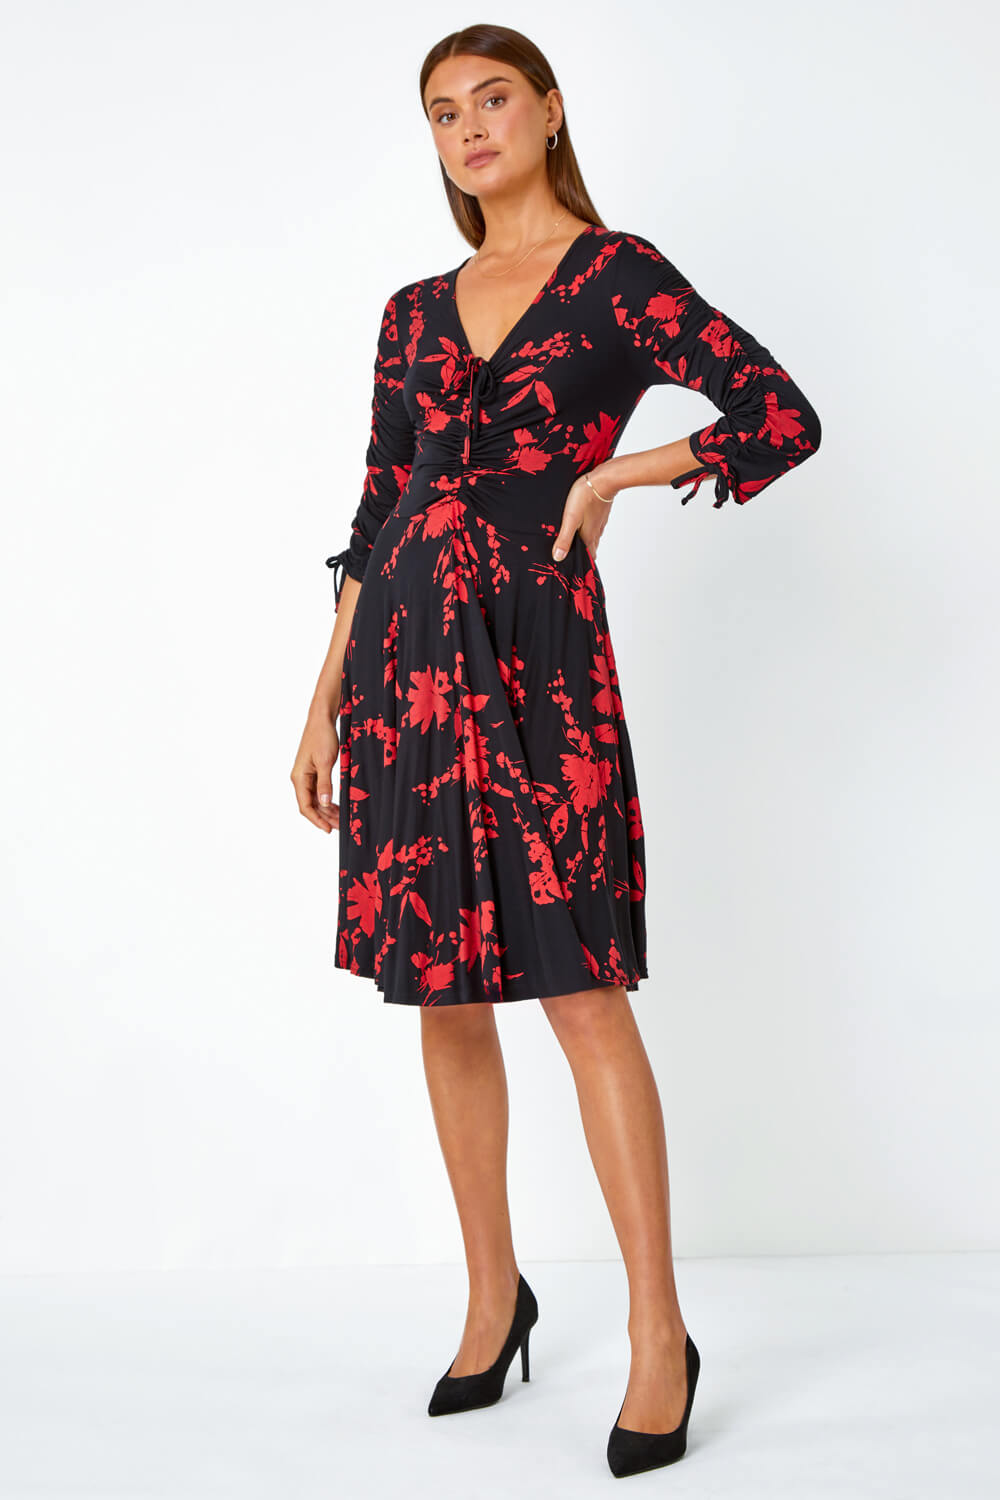 Red Floral Shadow Print Ruched Stretch Dress, Image 2 of 5